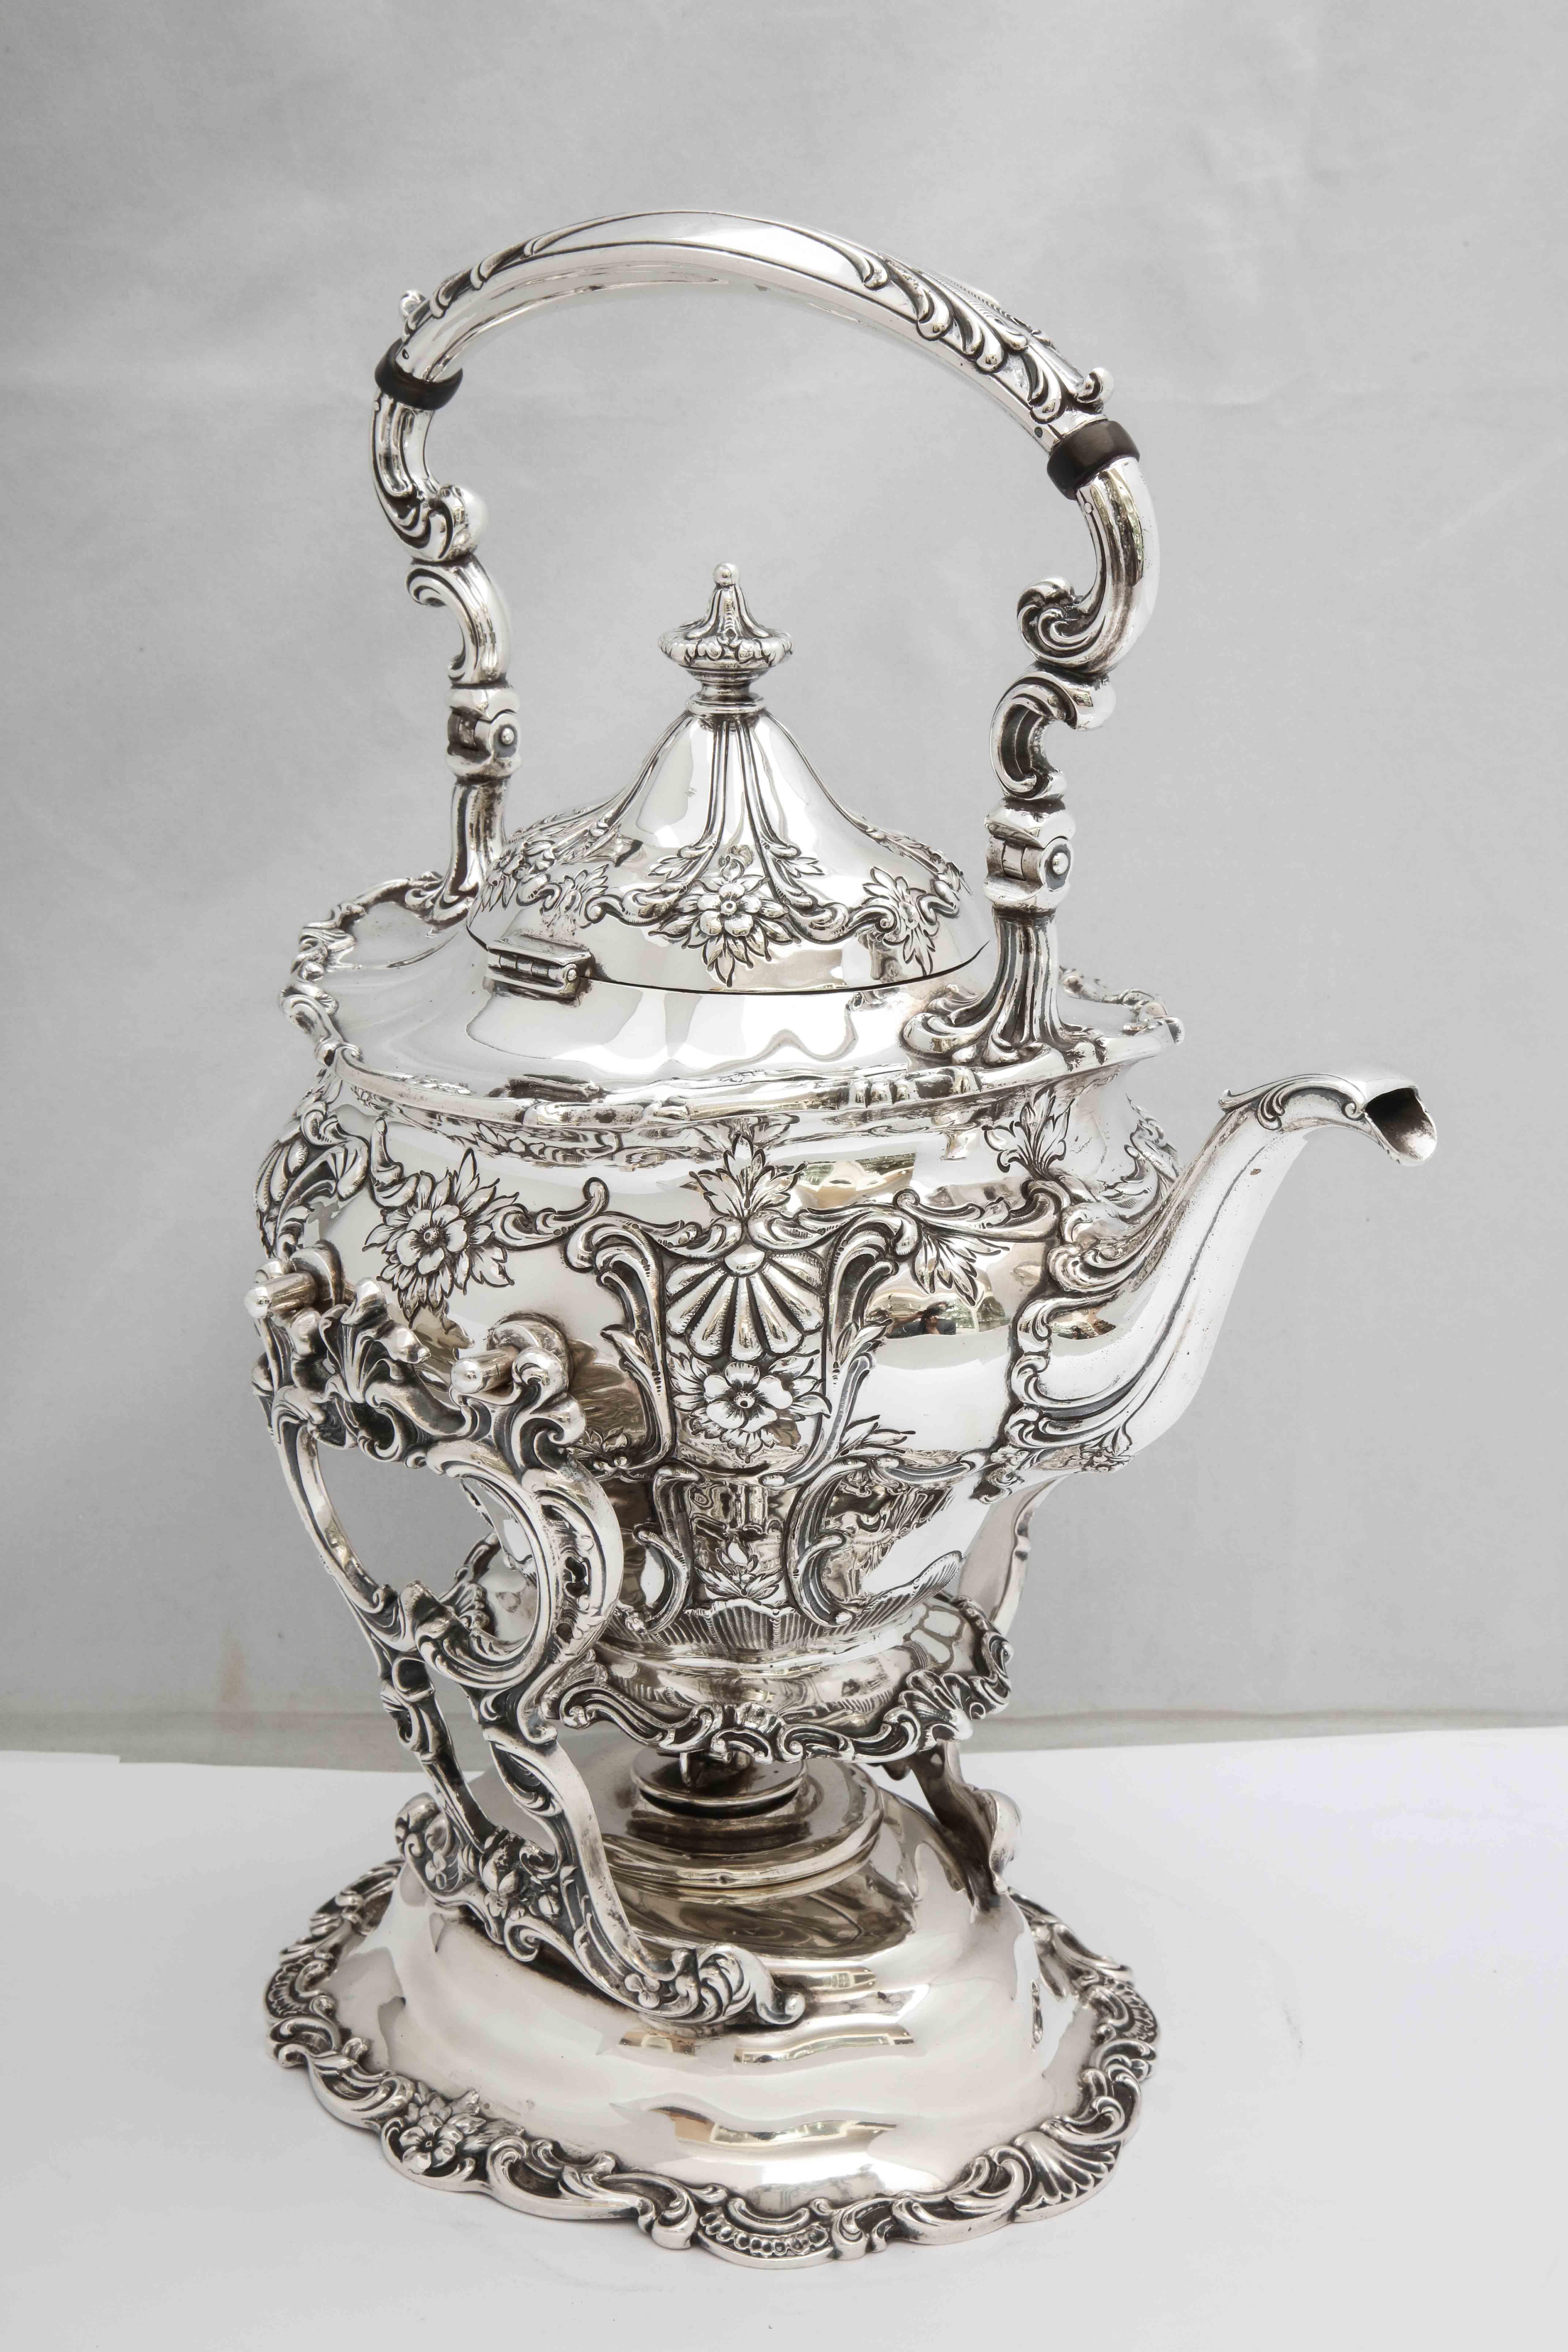 Victorian-Style Sterling Silver Tea Kettle on Stand by Gorham 4